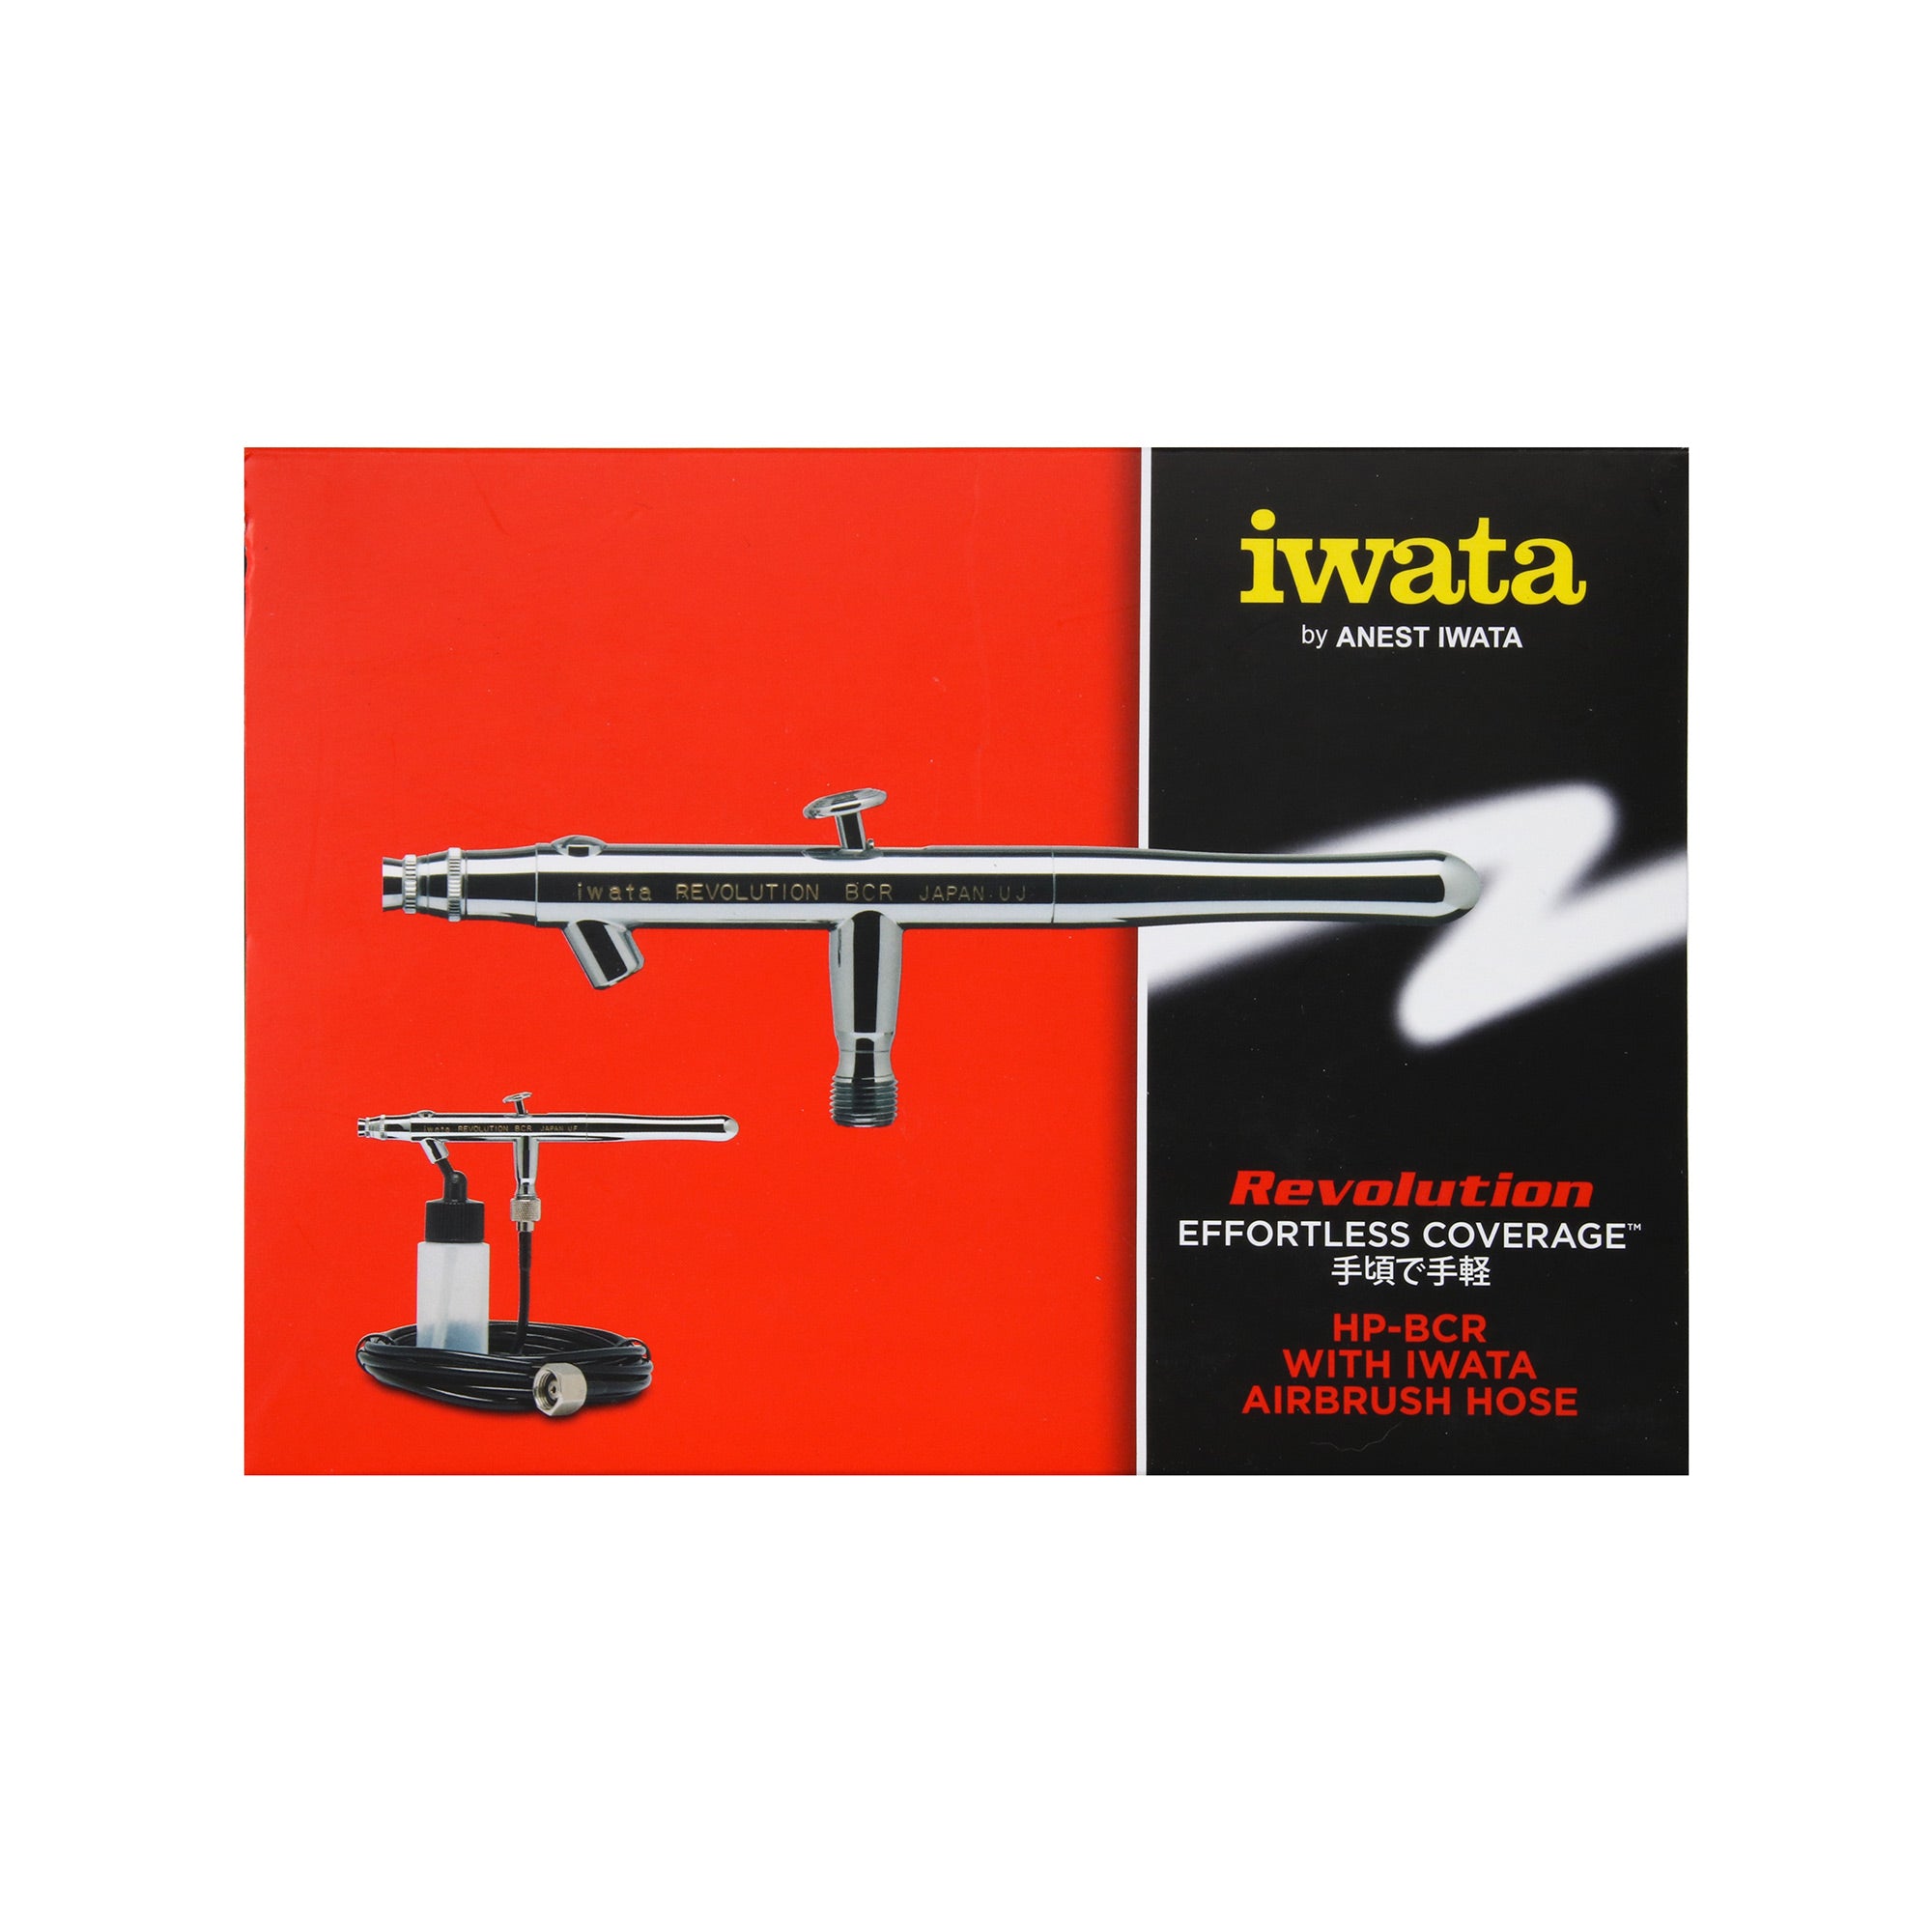 Iwata Revolution HP-BCR Siphon Feed Dual Action Airbrush (ONLINE